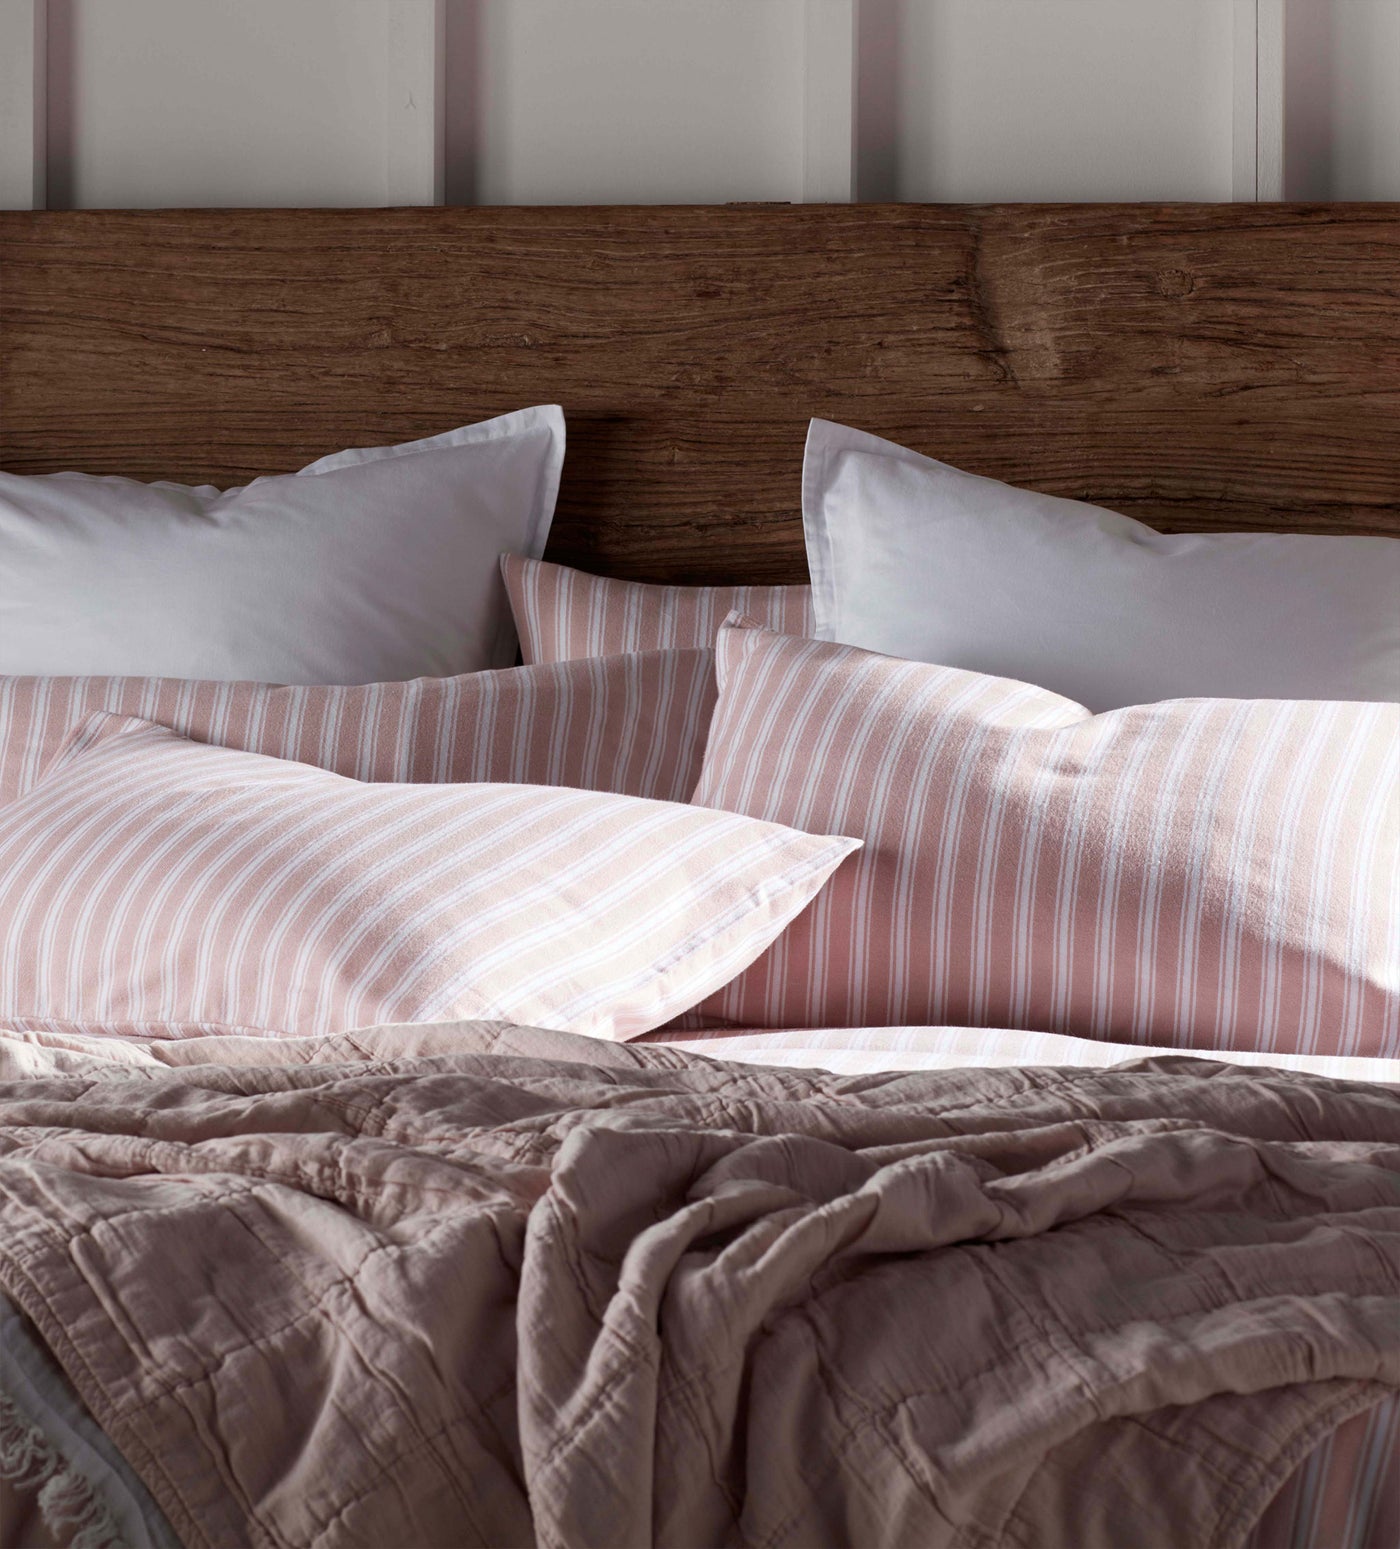 Blush Pink Fred Brushed 100% Cotton Duvet Cover